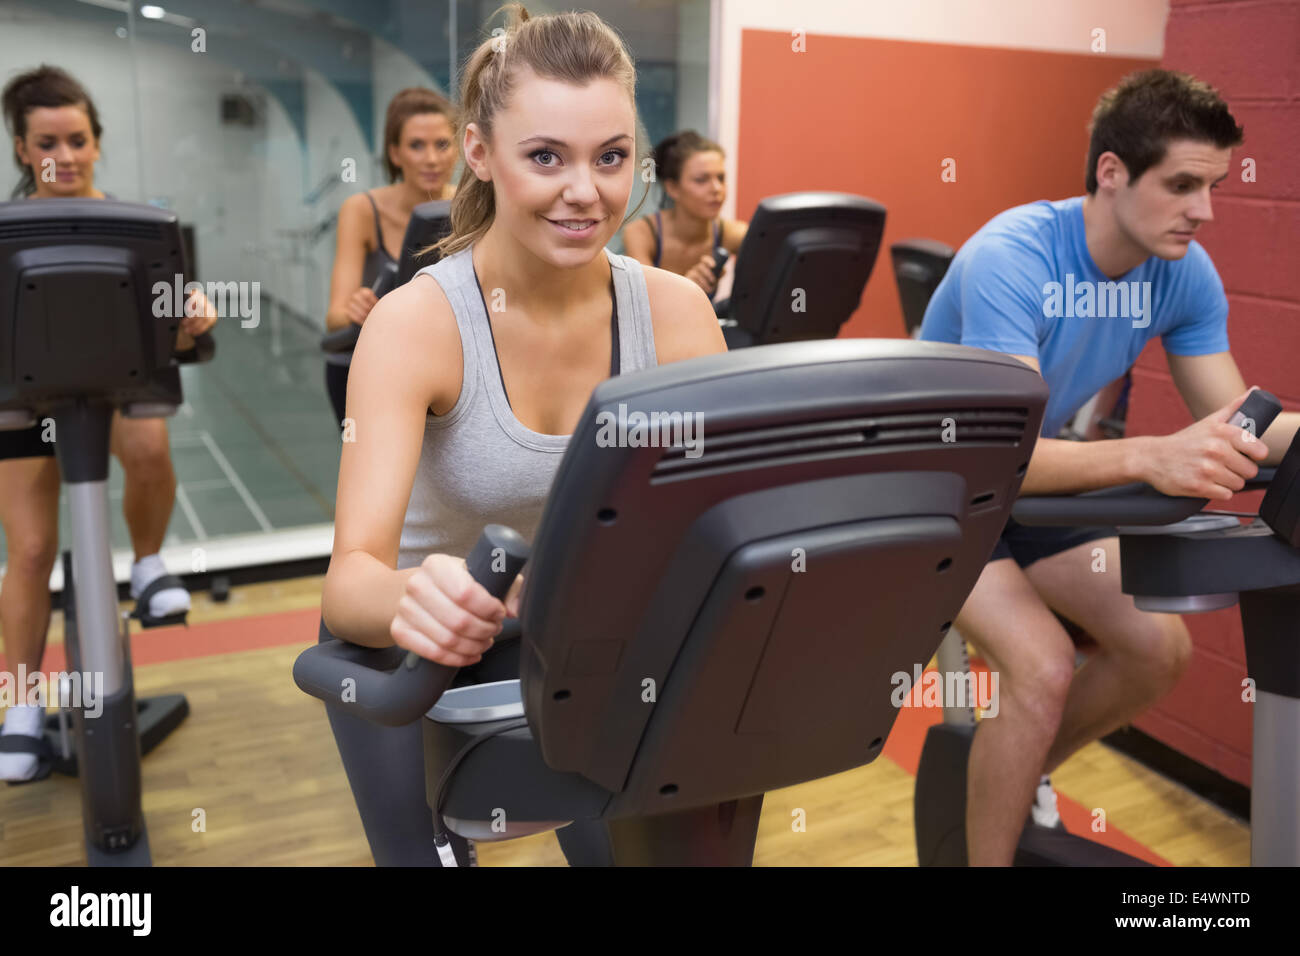 Smiling woman in spin class Stock Photo - Alamy